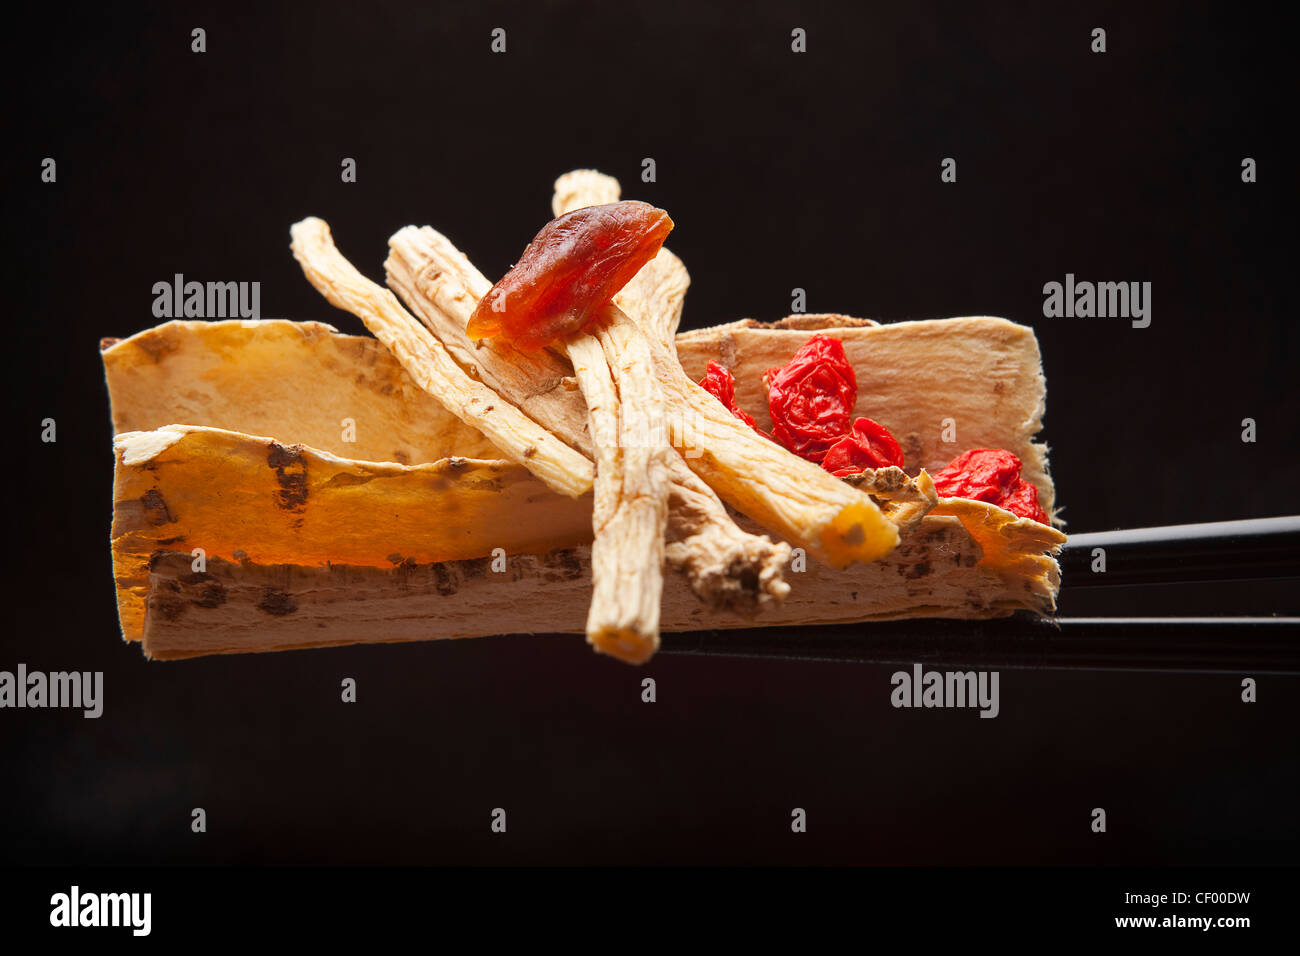 Pak Kee Dong Sum ingredients: Dong Sum root, dried Longan; Astragalus root; red Medeberry on chopsticks Stock Photo